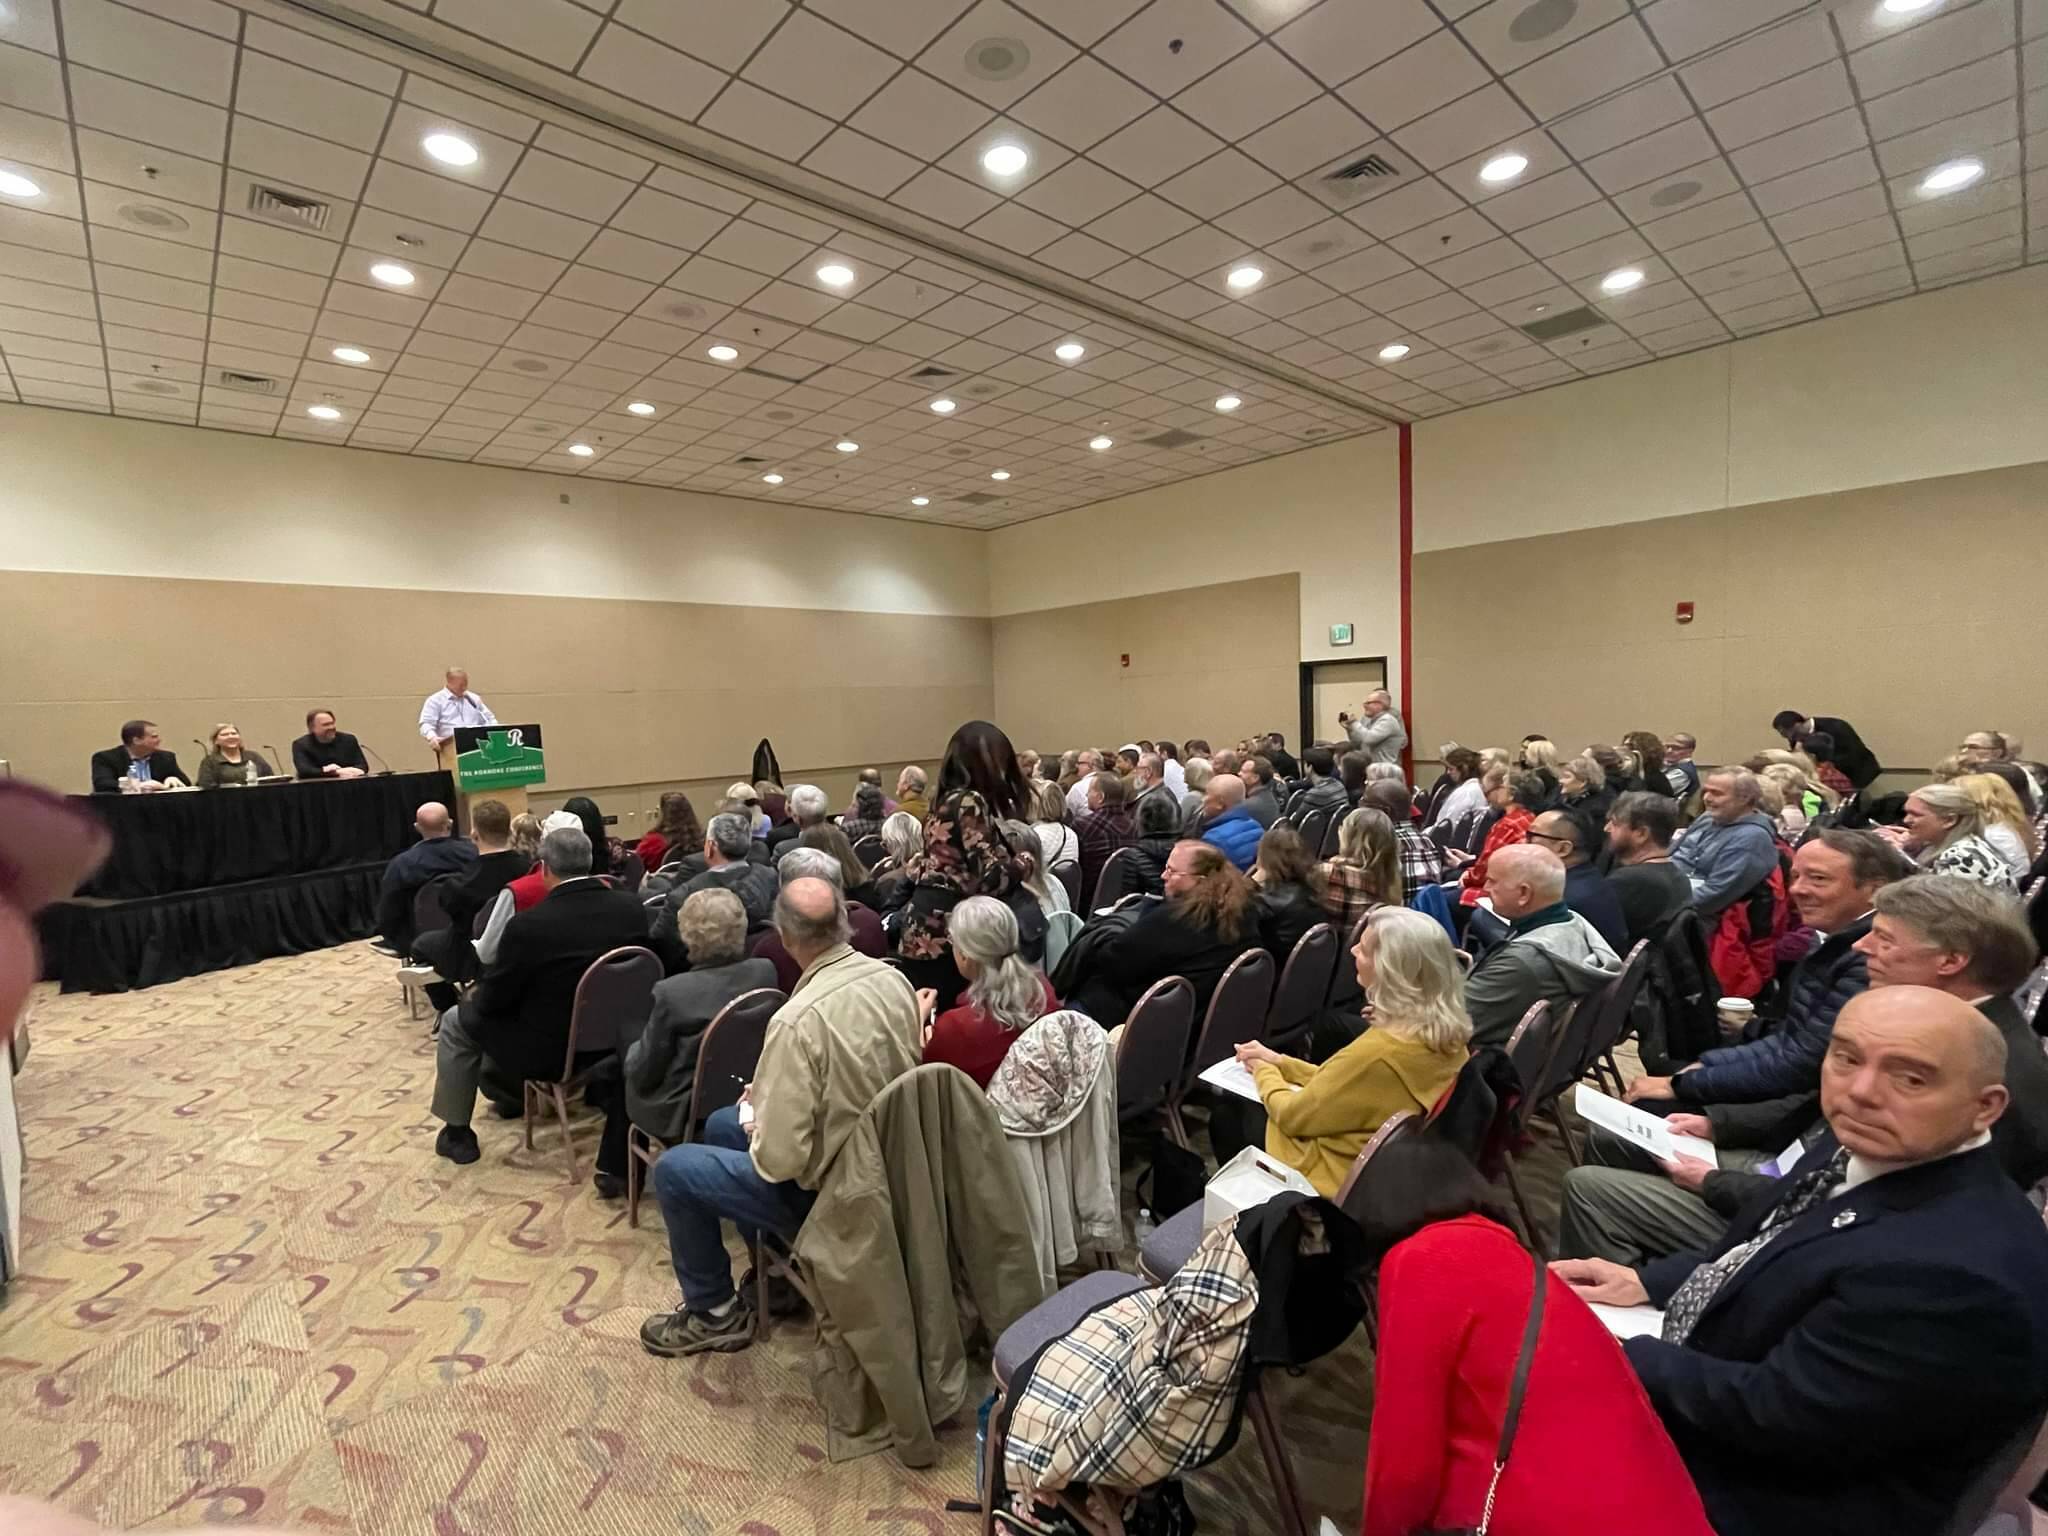 Photo courtesy of John Hamer
A sold-out crowd of more than 700 people packed the Ocean Shores Convention Center for the 15th annual Roanoke Conference.